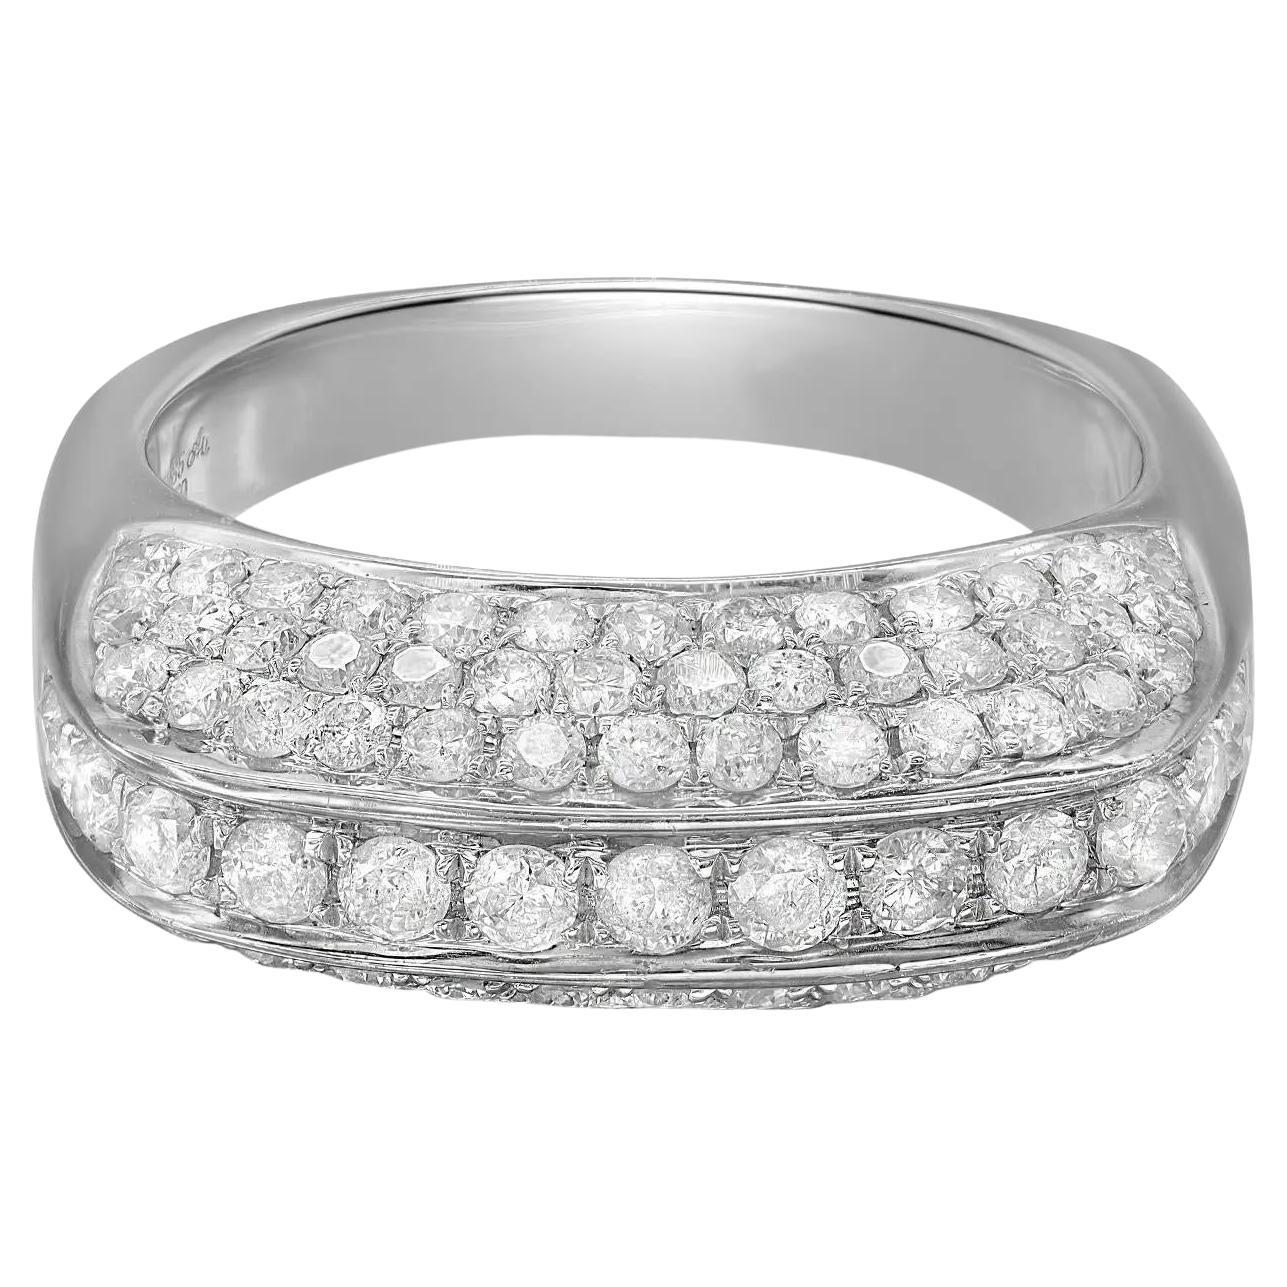 1.62cttw Pave Set Round Cut Diamond Ladies Square Ring 14k White Gold For Sale